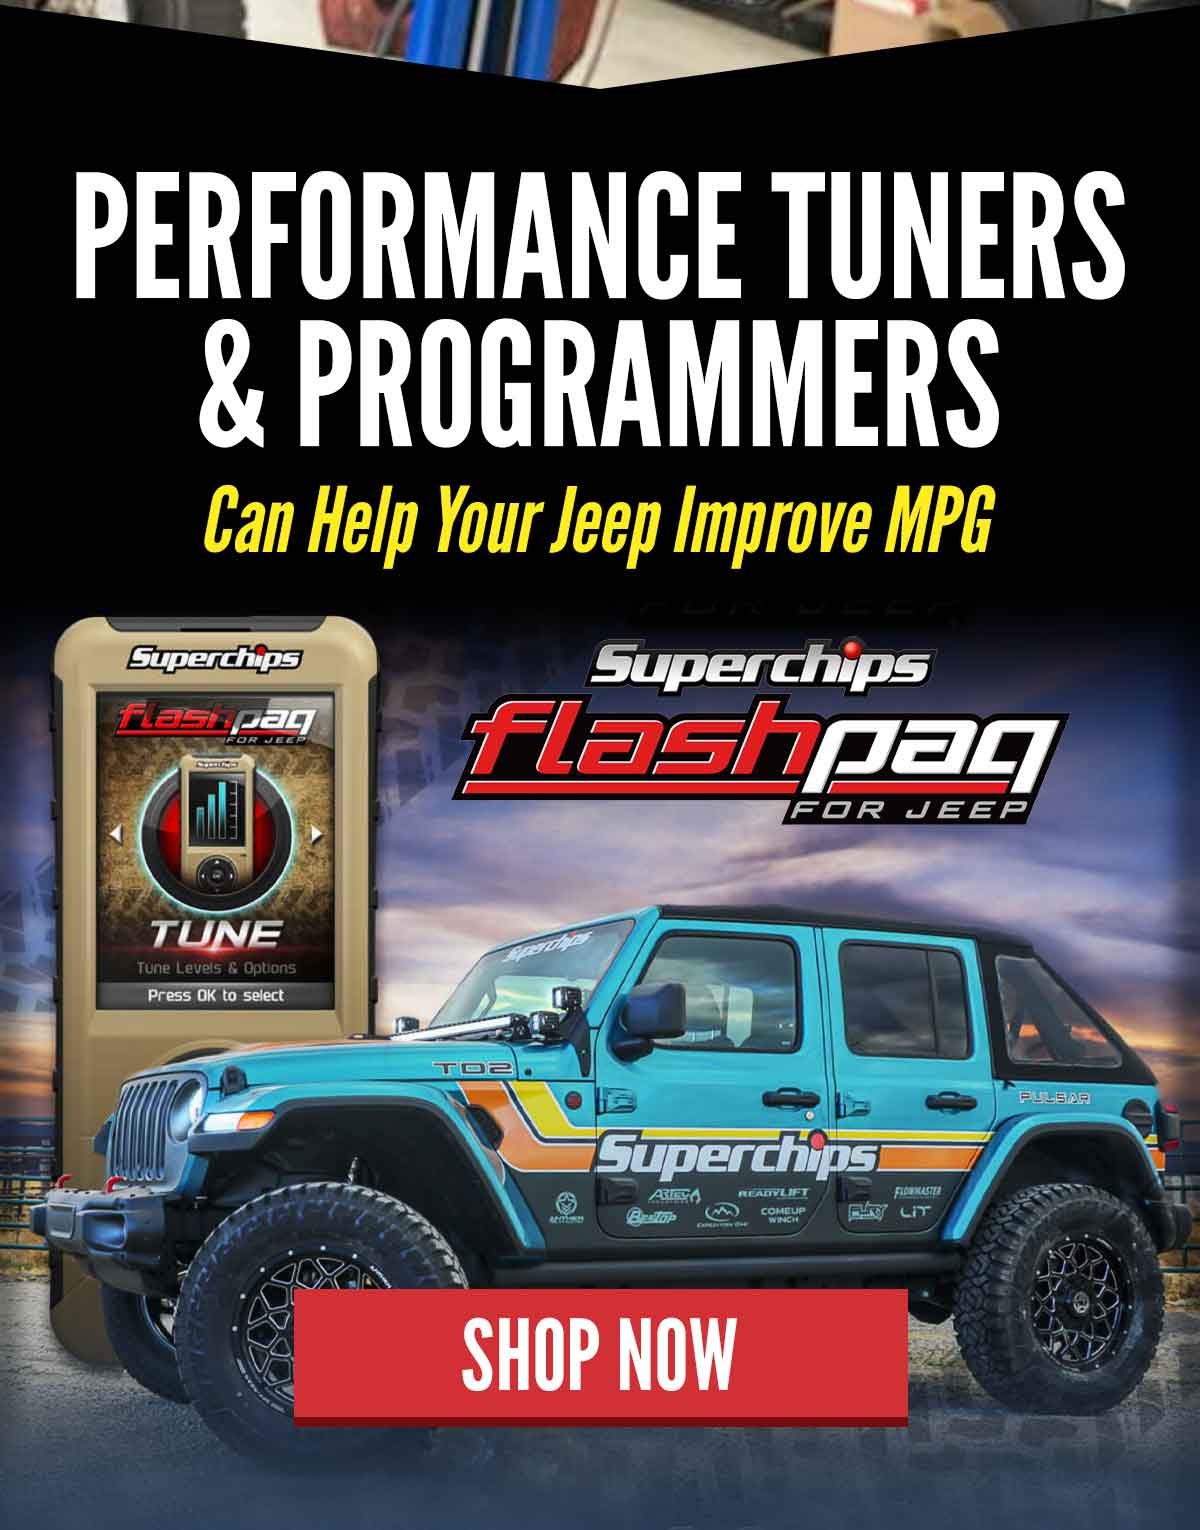 Performance Tuners & Programmers Can Help Your Jeep Improve MPG